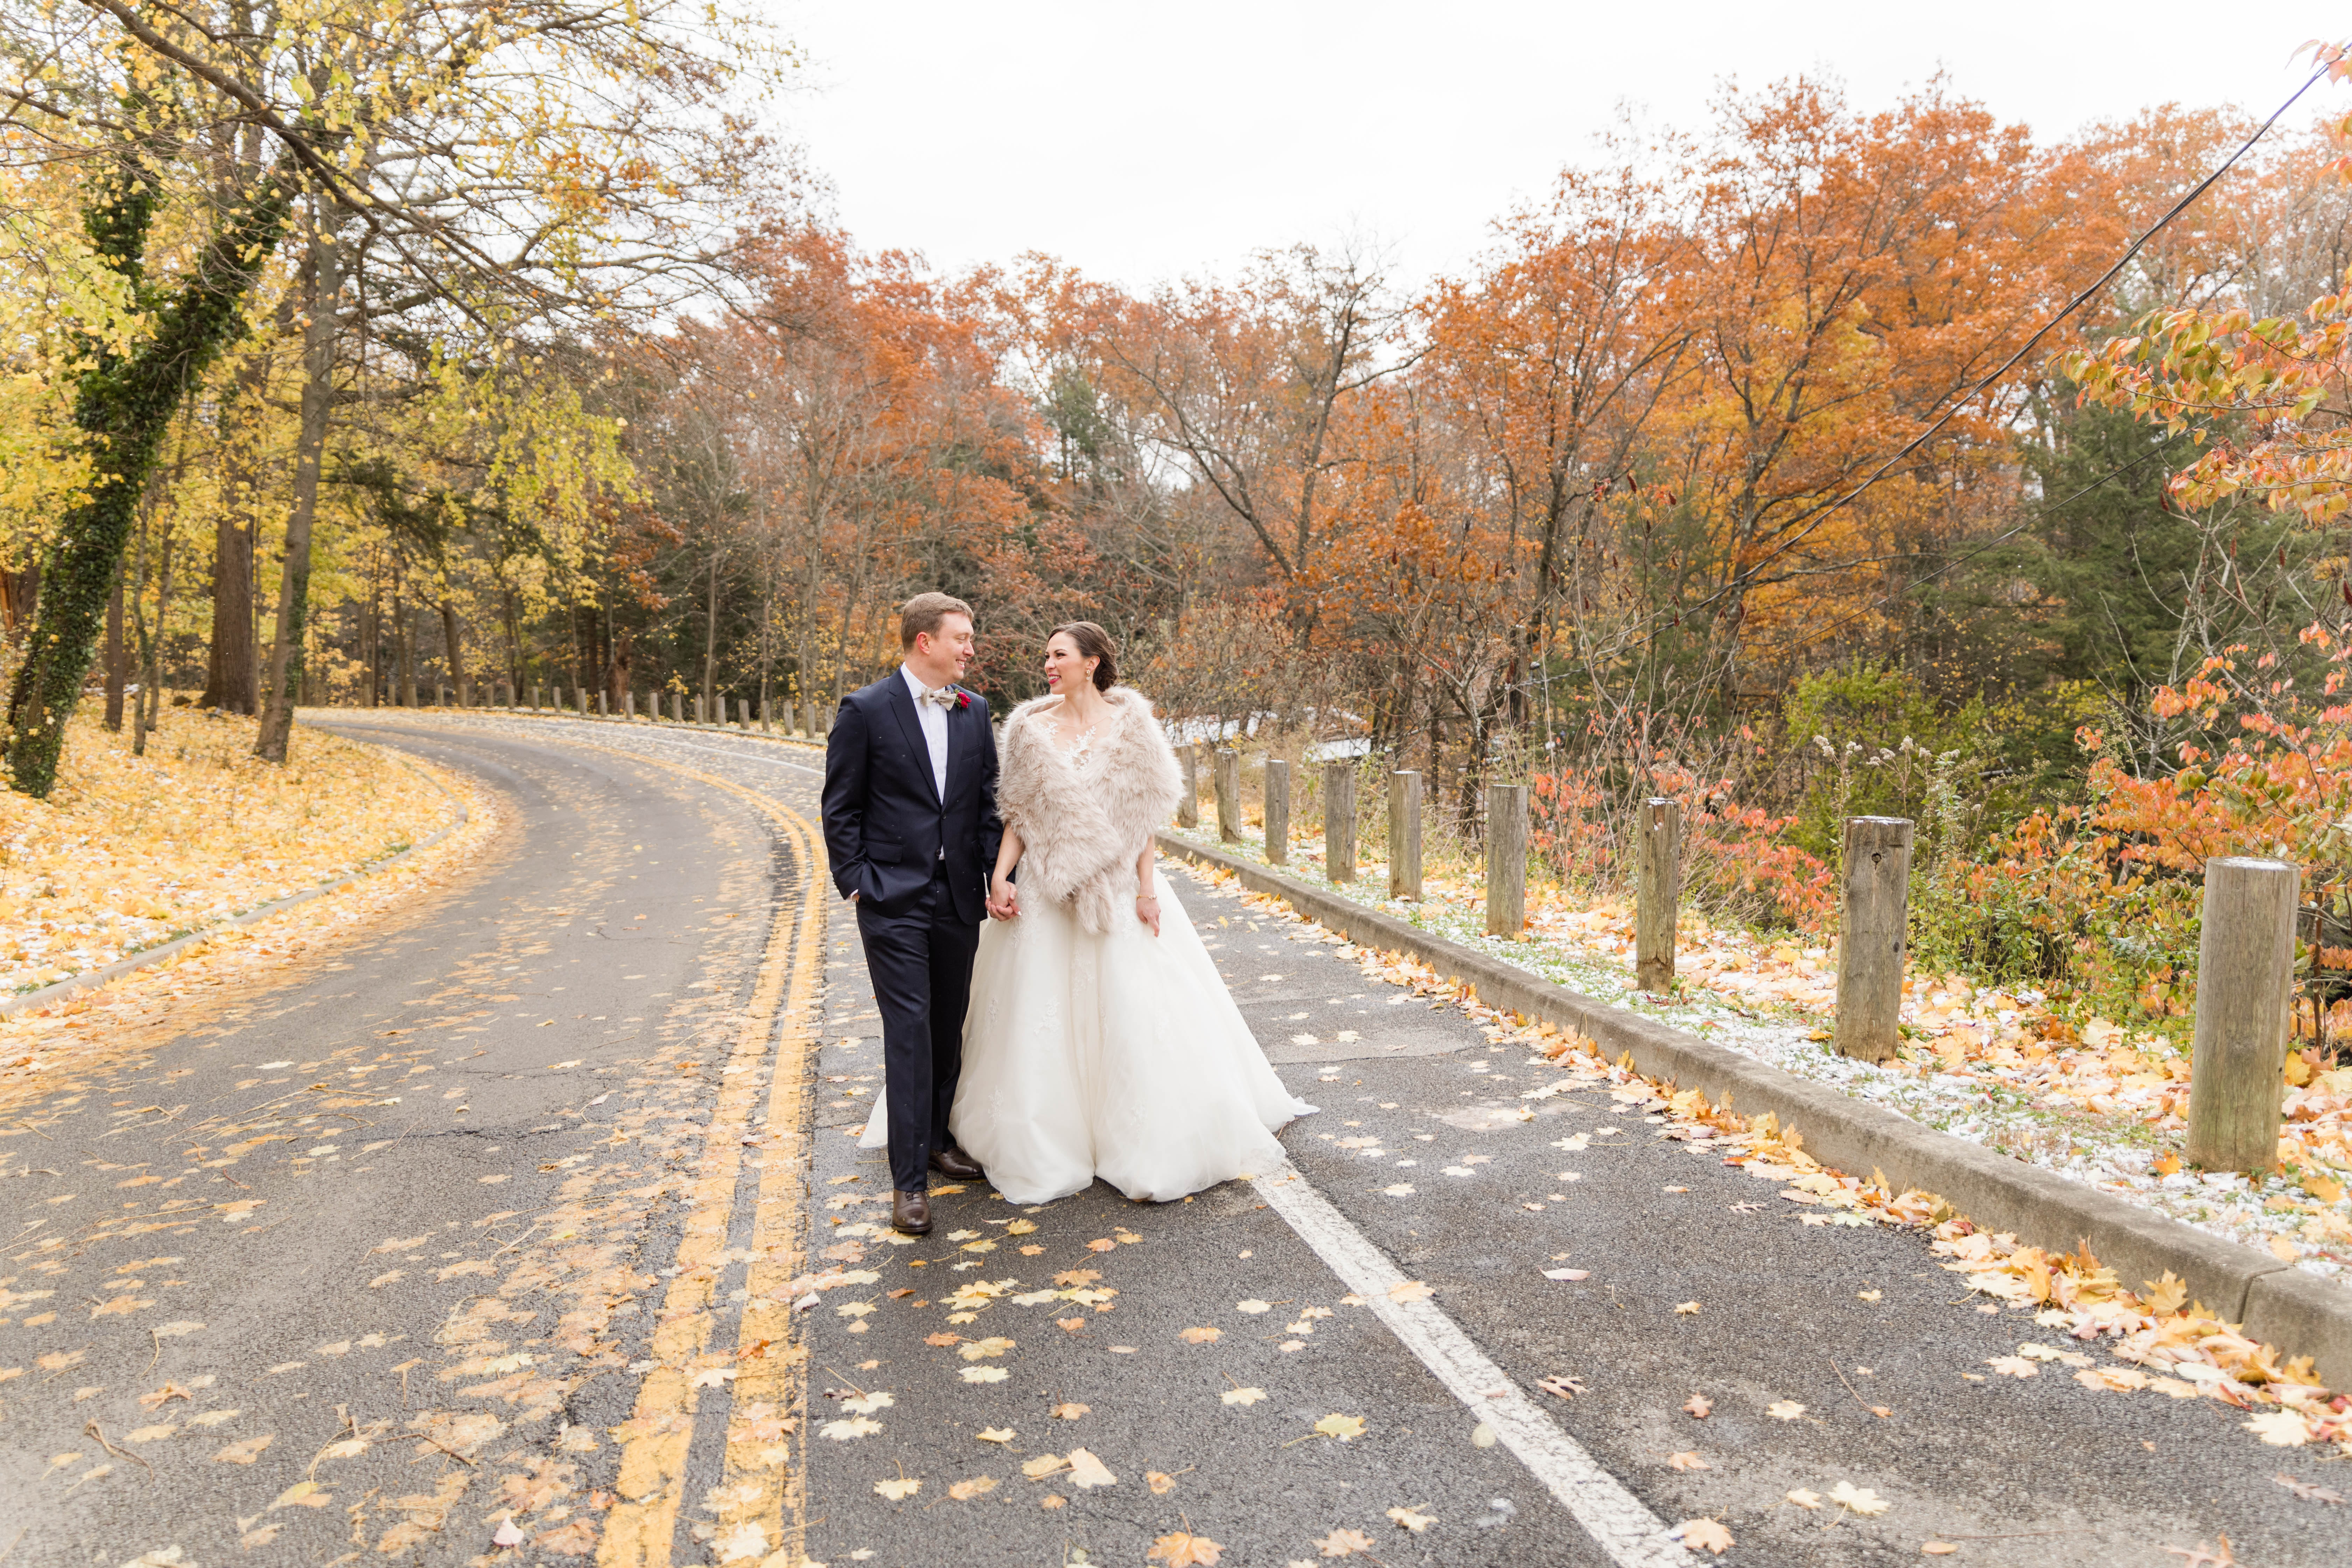 Fall Wedding At The Avalon Country Club: Danelle and Garrett, Sweet Williams Photography, Nashville, Tennessee